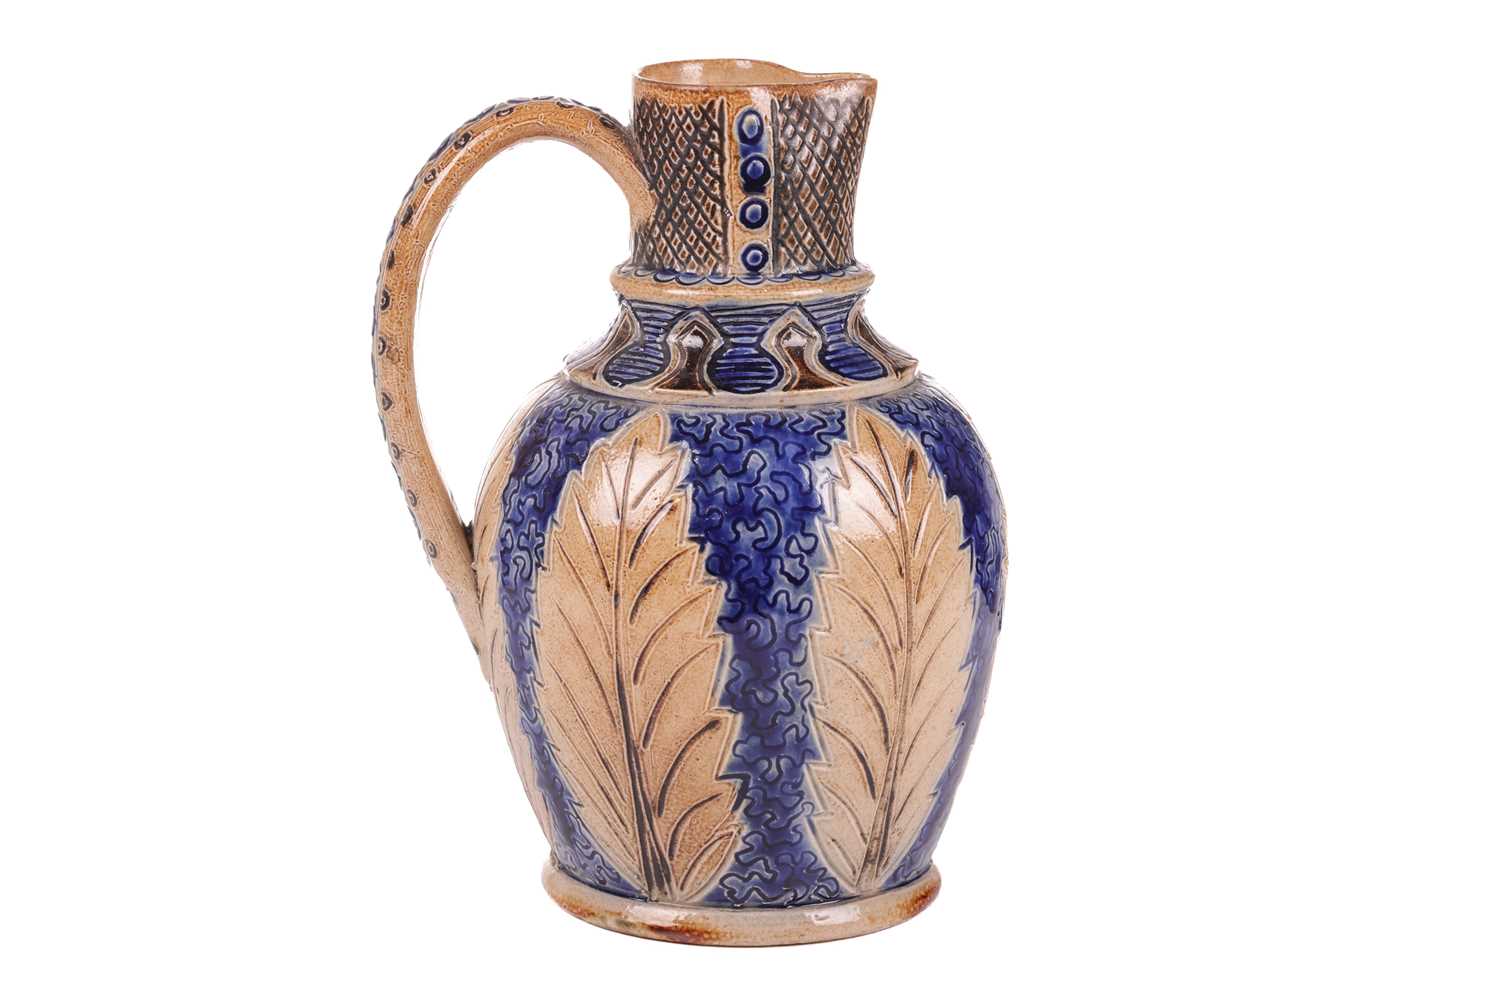 A late 19th-century stoneware jug by Thomas Smith & Co, in the manner of Doulton or Martin Brothers,